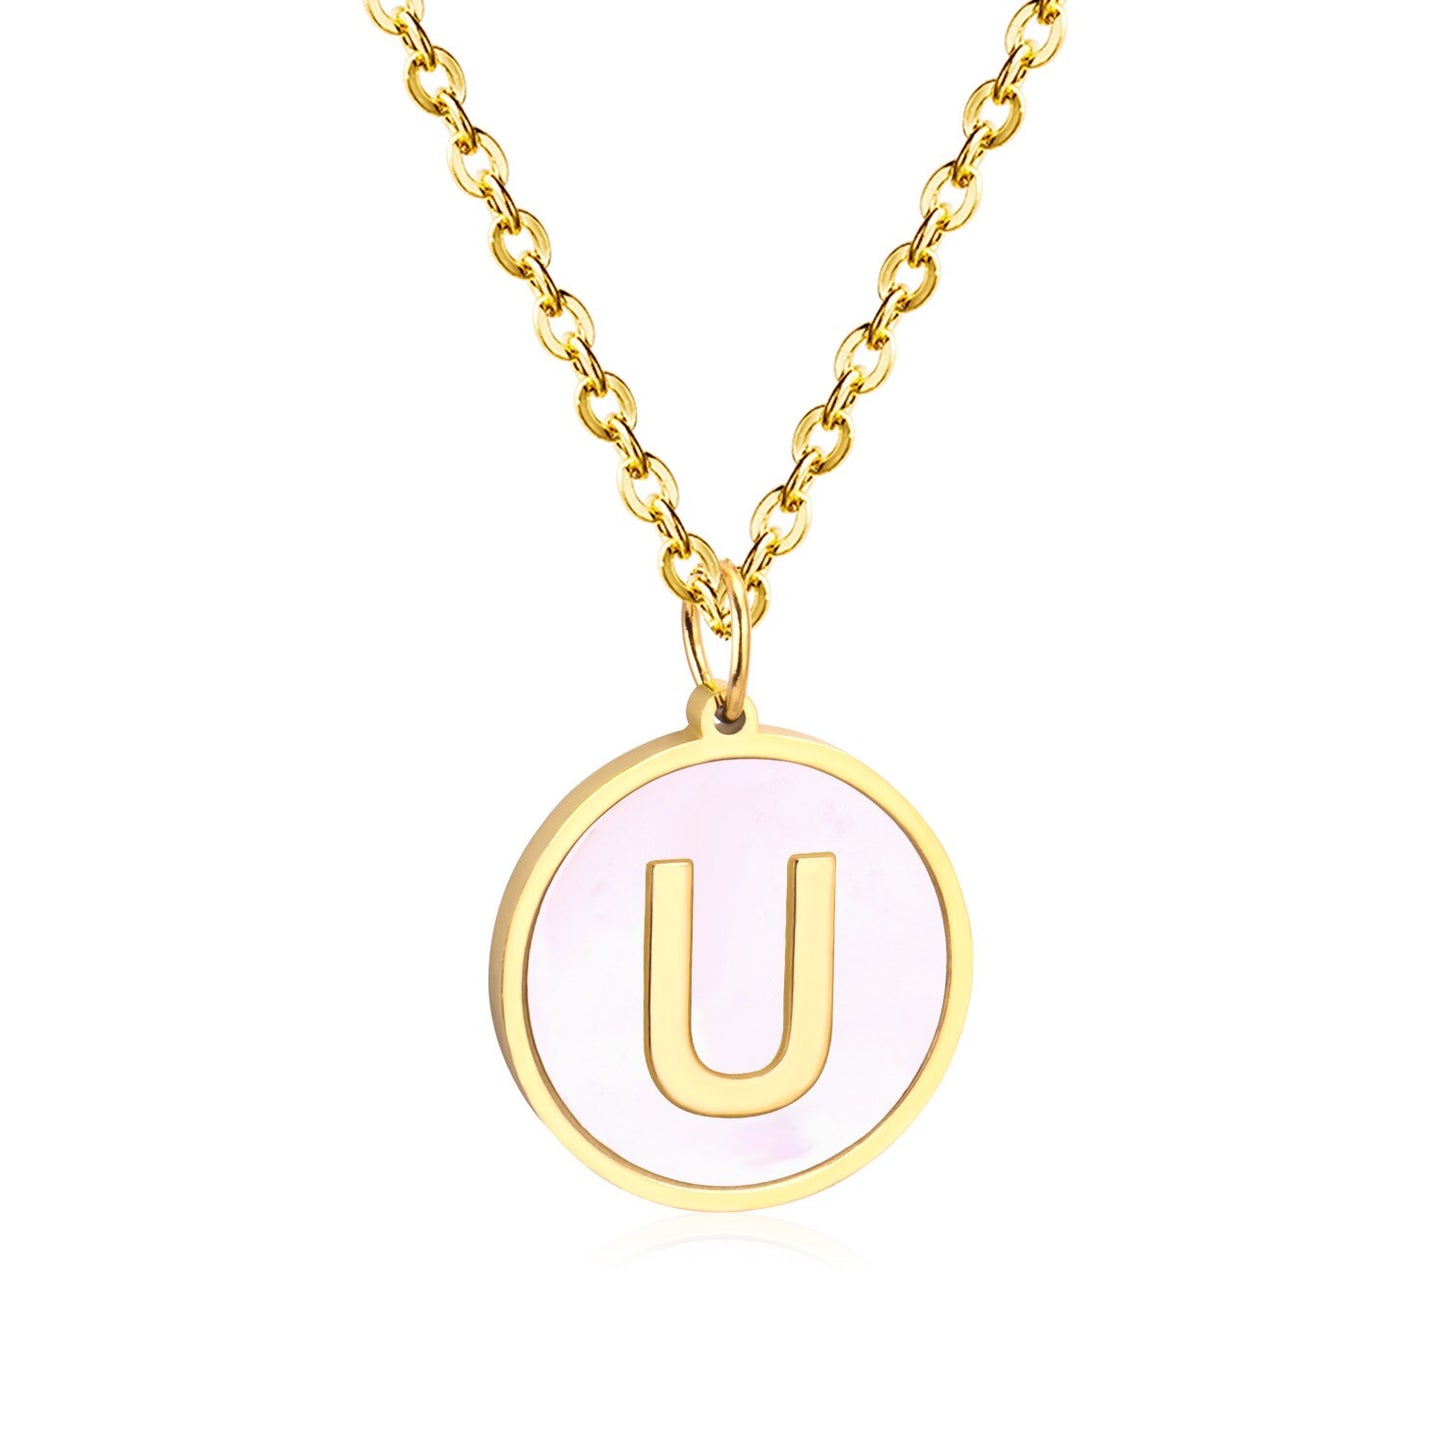 Initial Women's Necklace Gold/Silver / White Shell Pendant